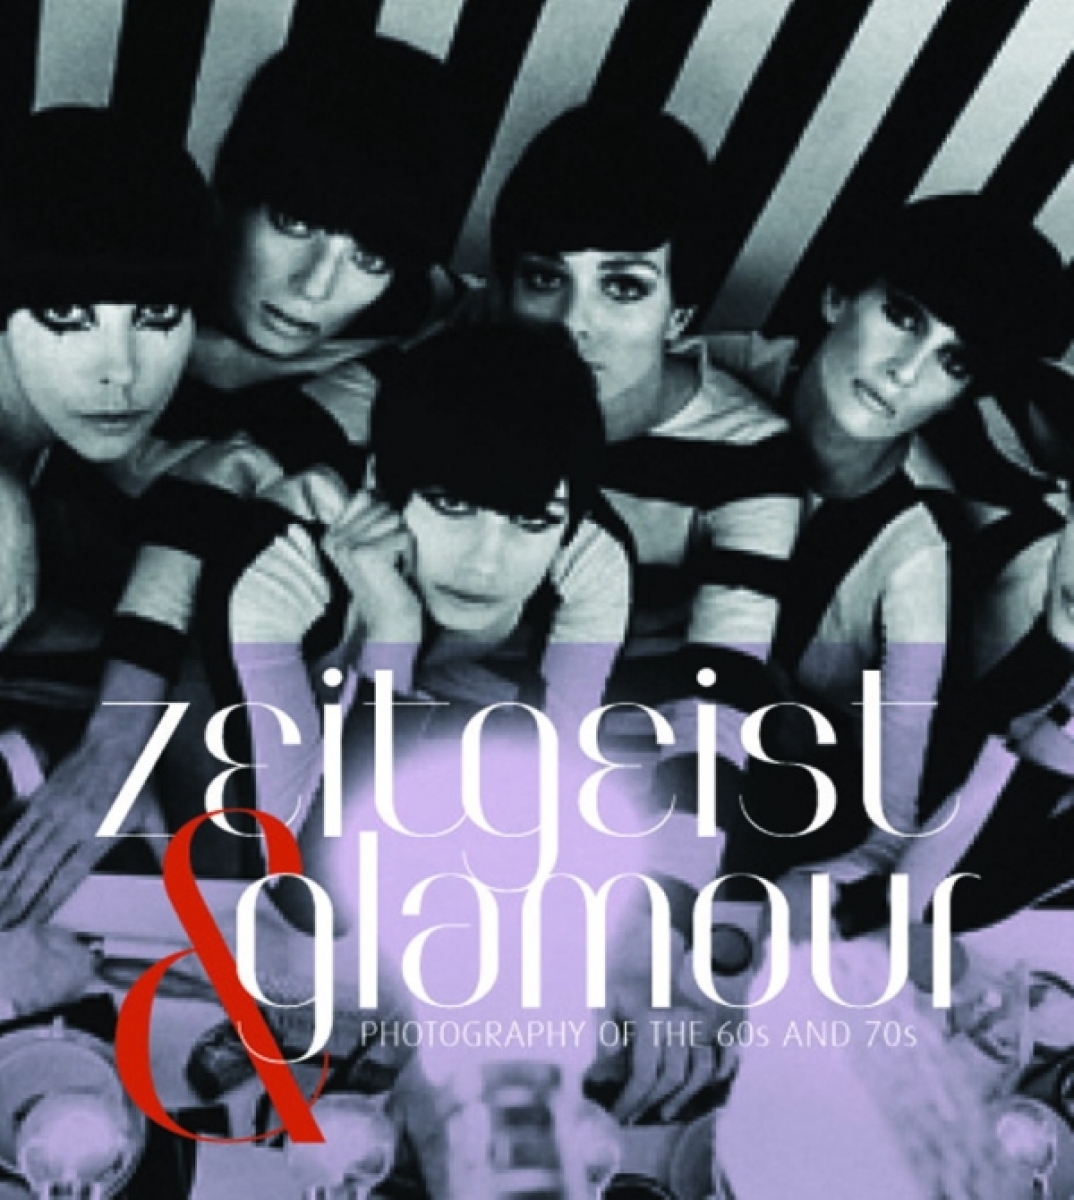 Nicola E. Zeitgeist and Glamour: Photography of the '60s and '70s 